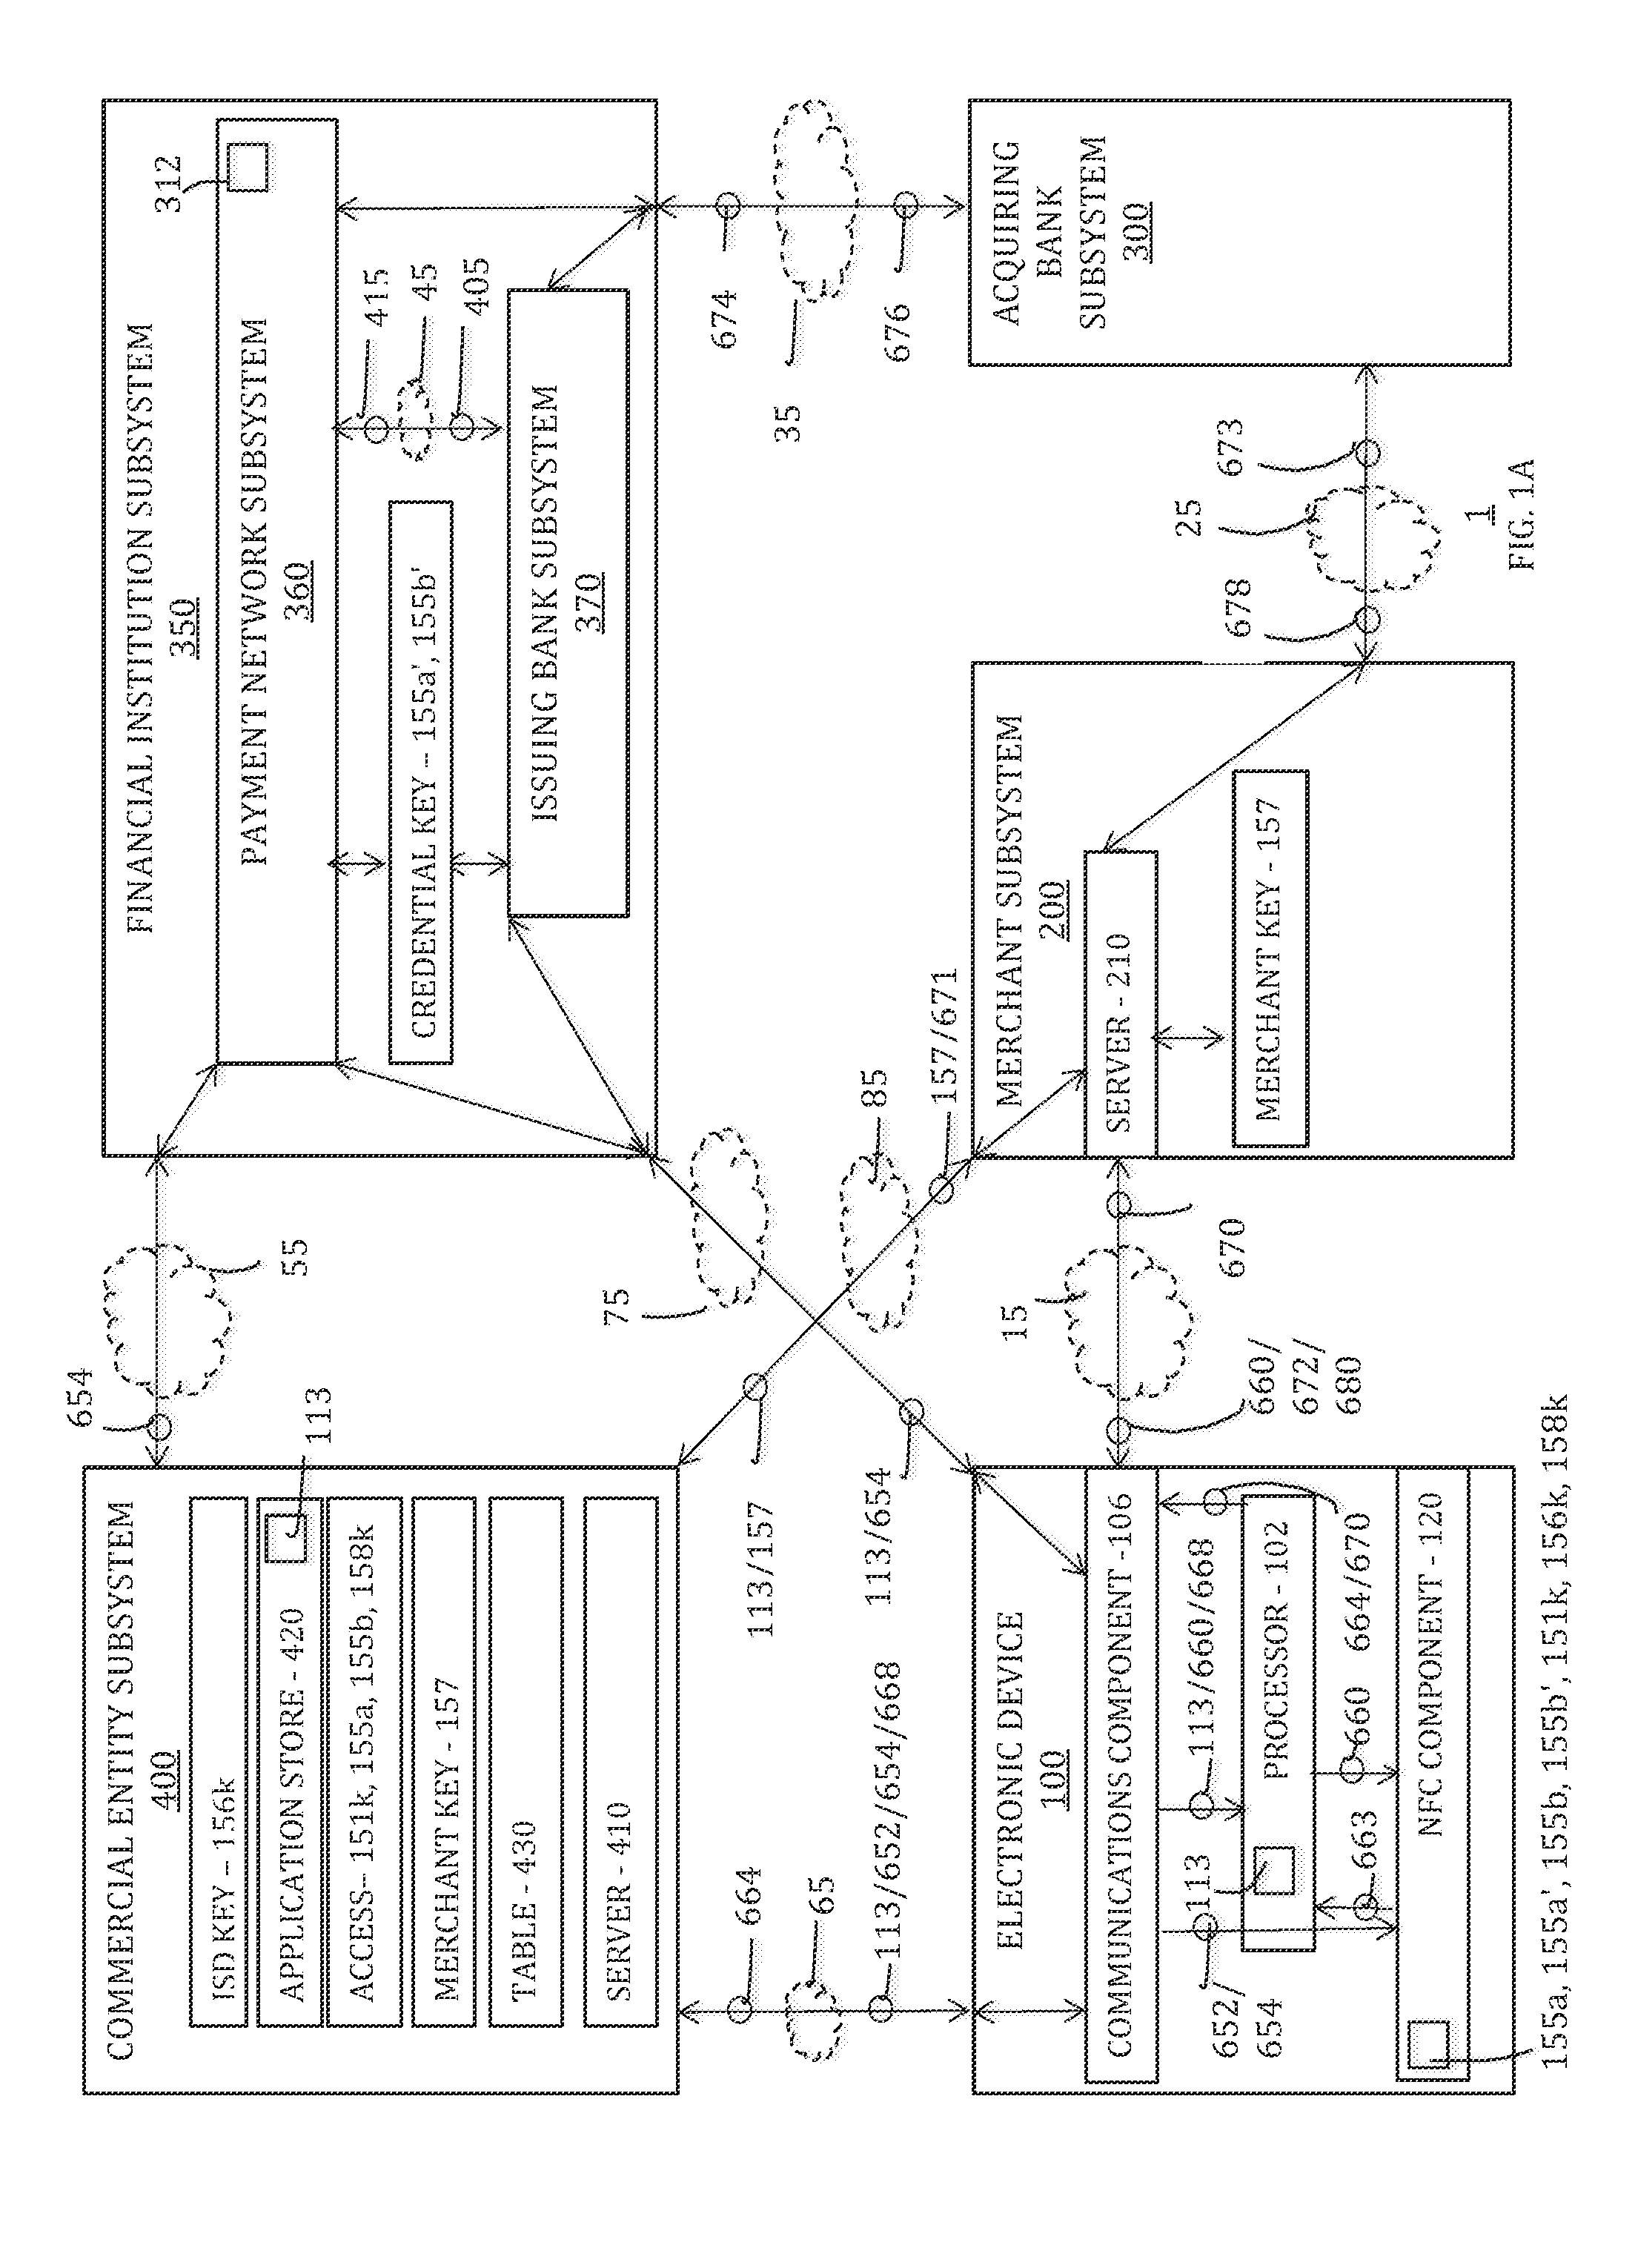 Online payments using a secure element of an electronic device